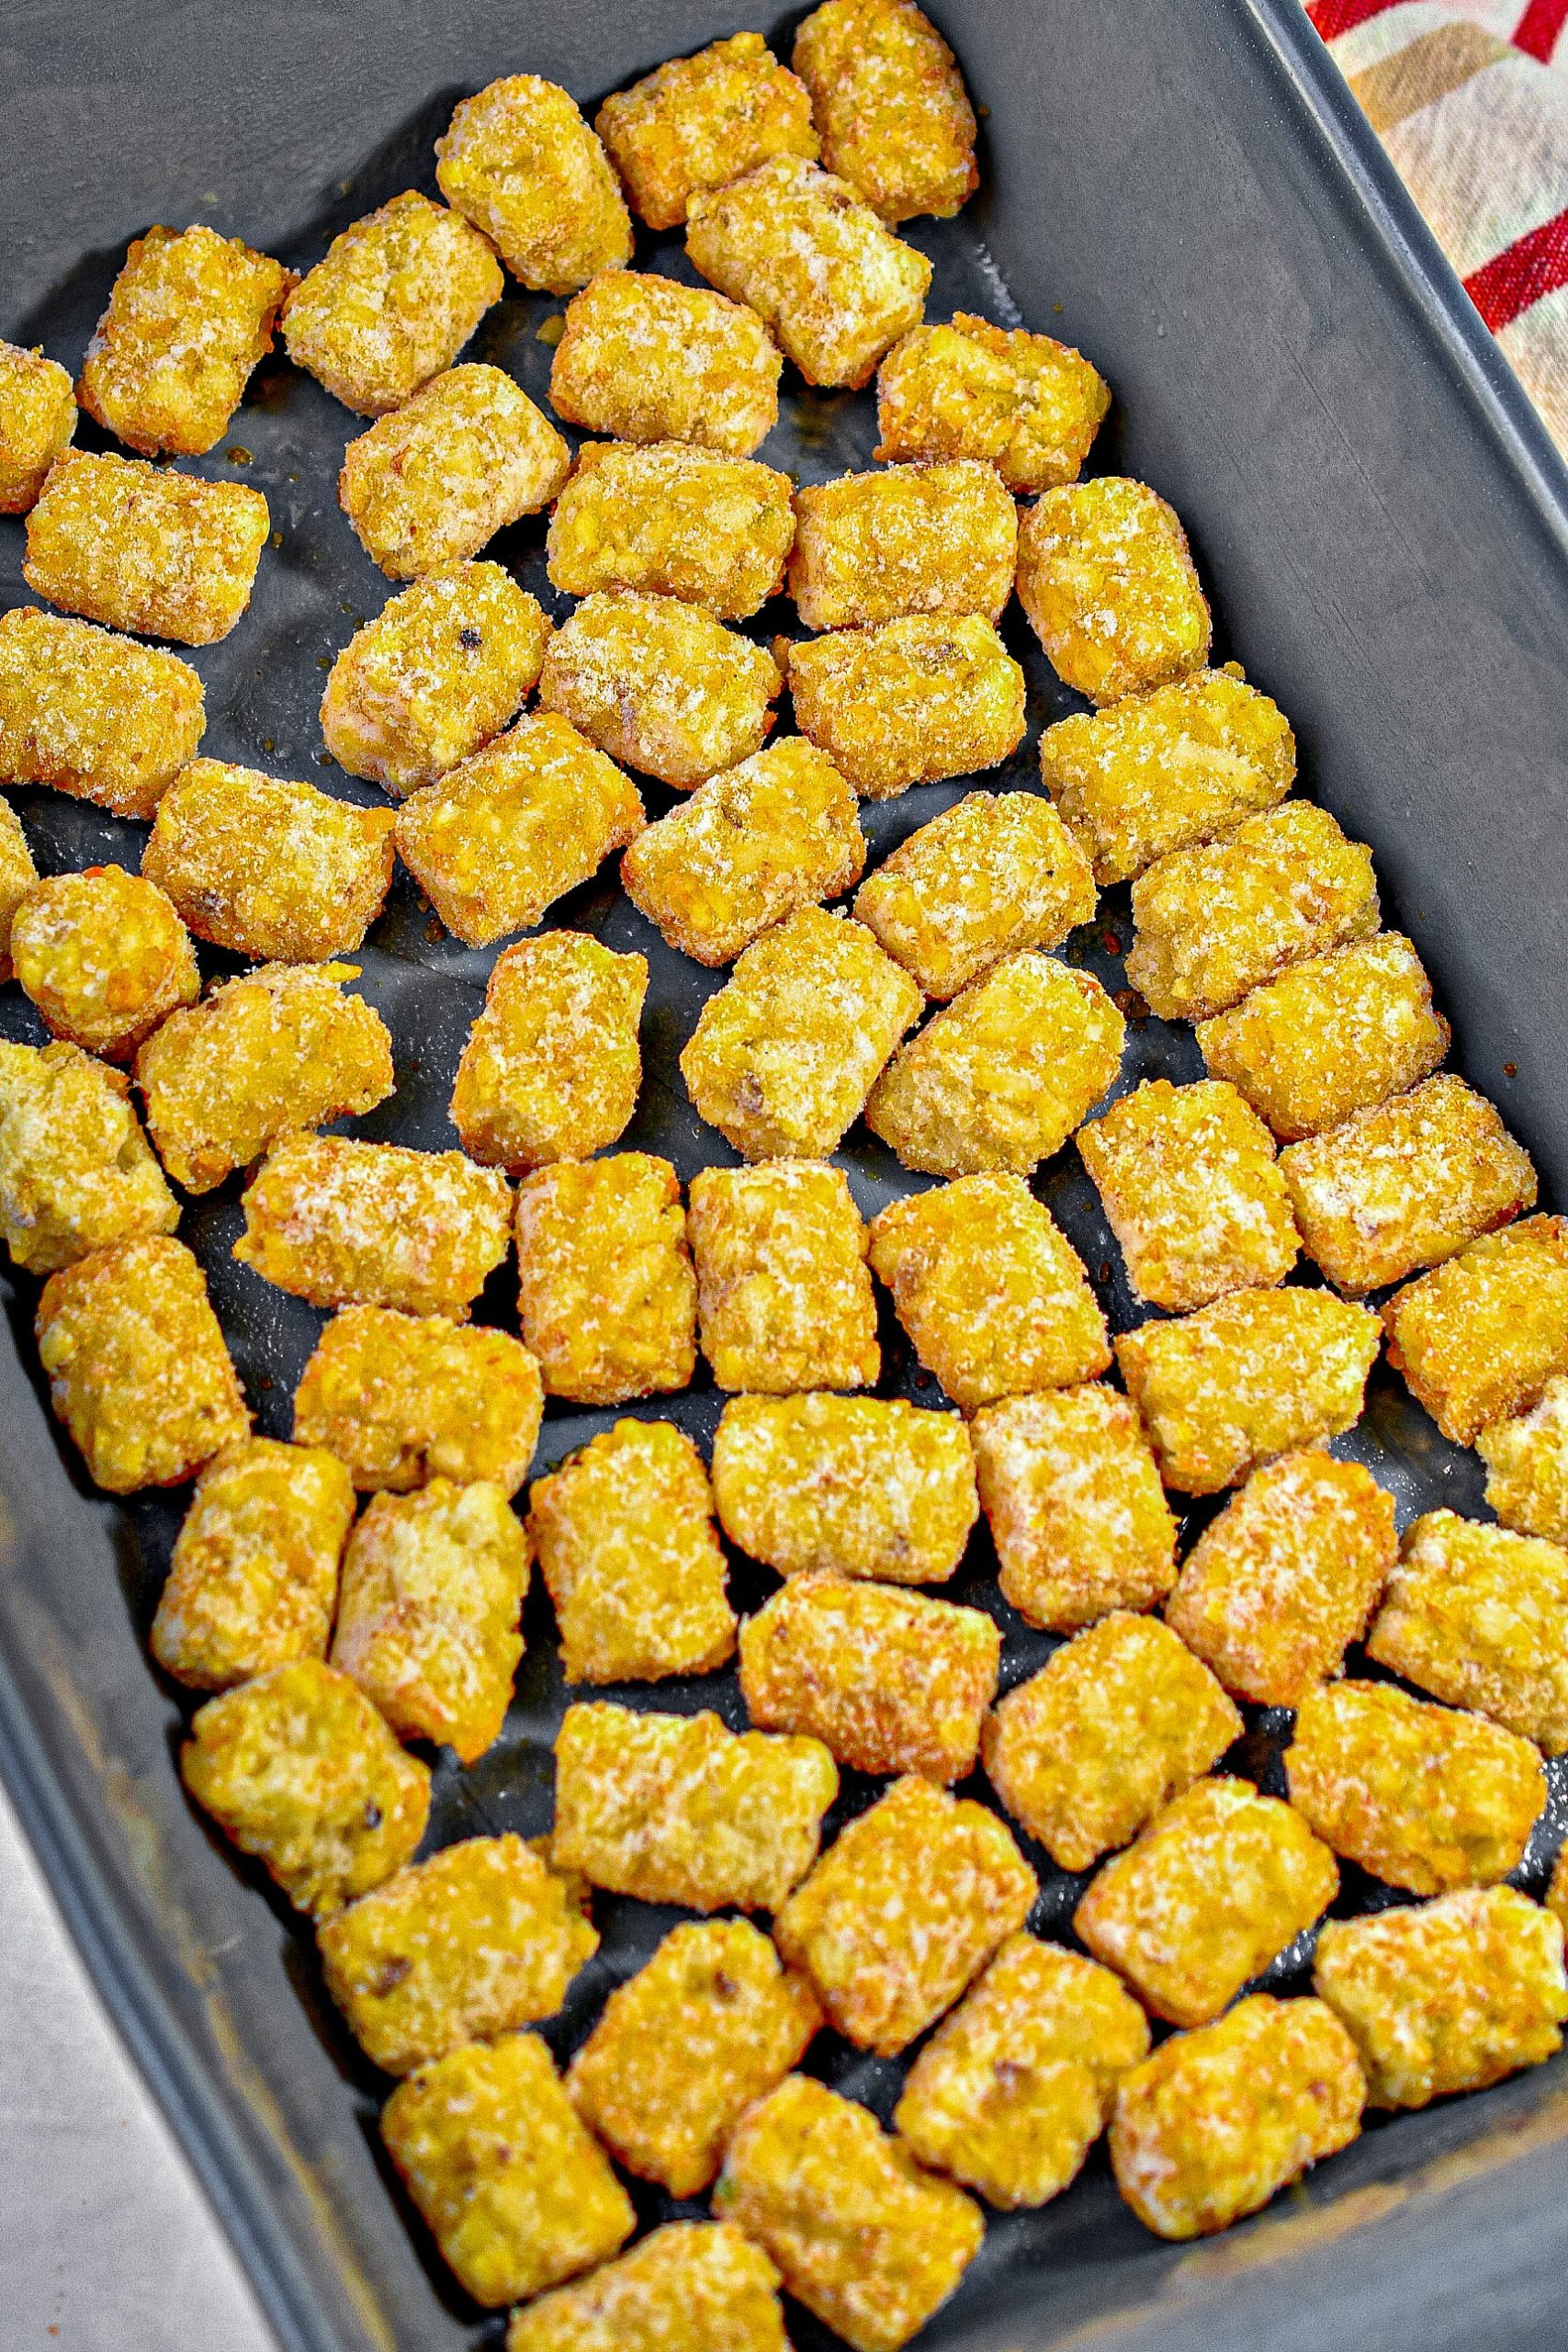 Add ½ of the tater tots in a single layer on the bottom of a well-greased 9x13 baking dish.